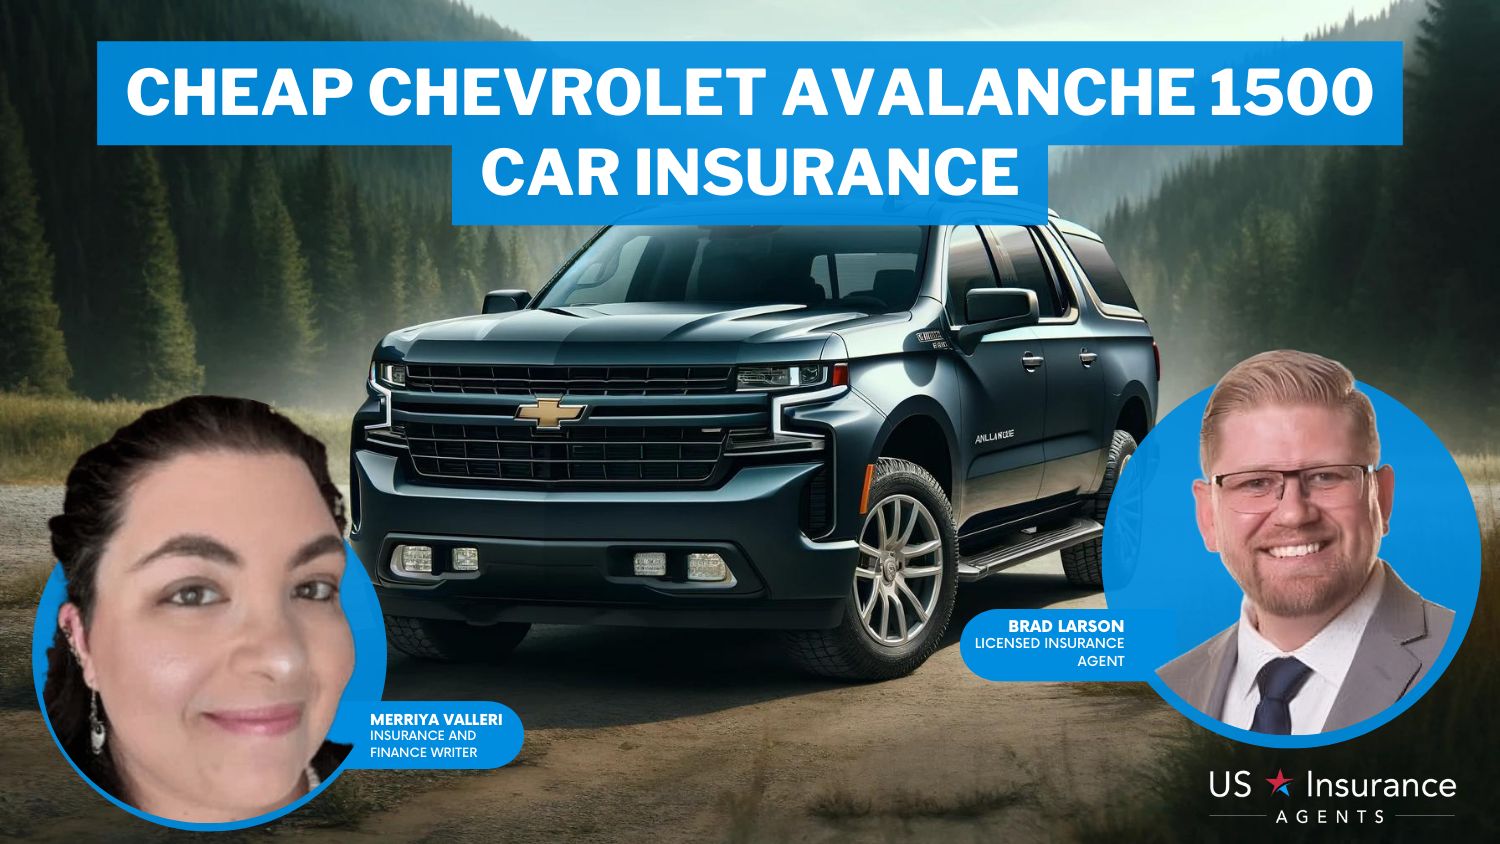 Cheap Chevrolet Avalanche 1500 Car Insurance: State Farm, Erie, and USAA